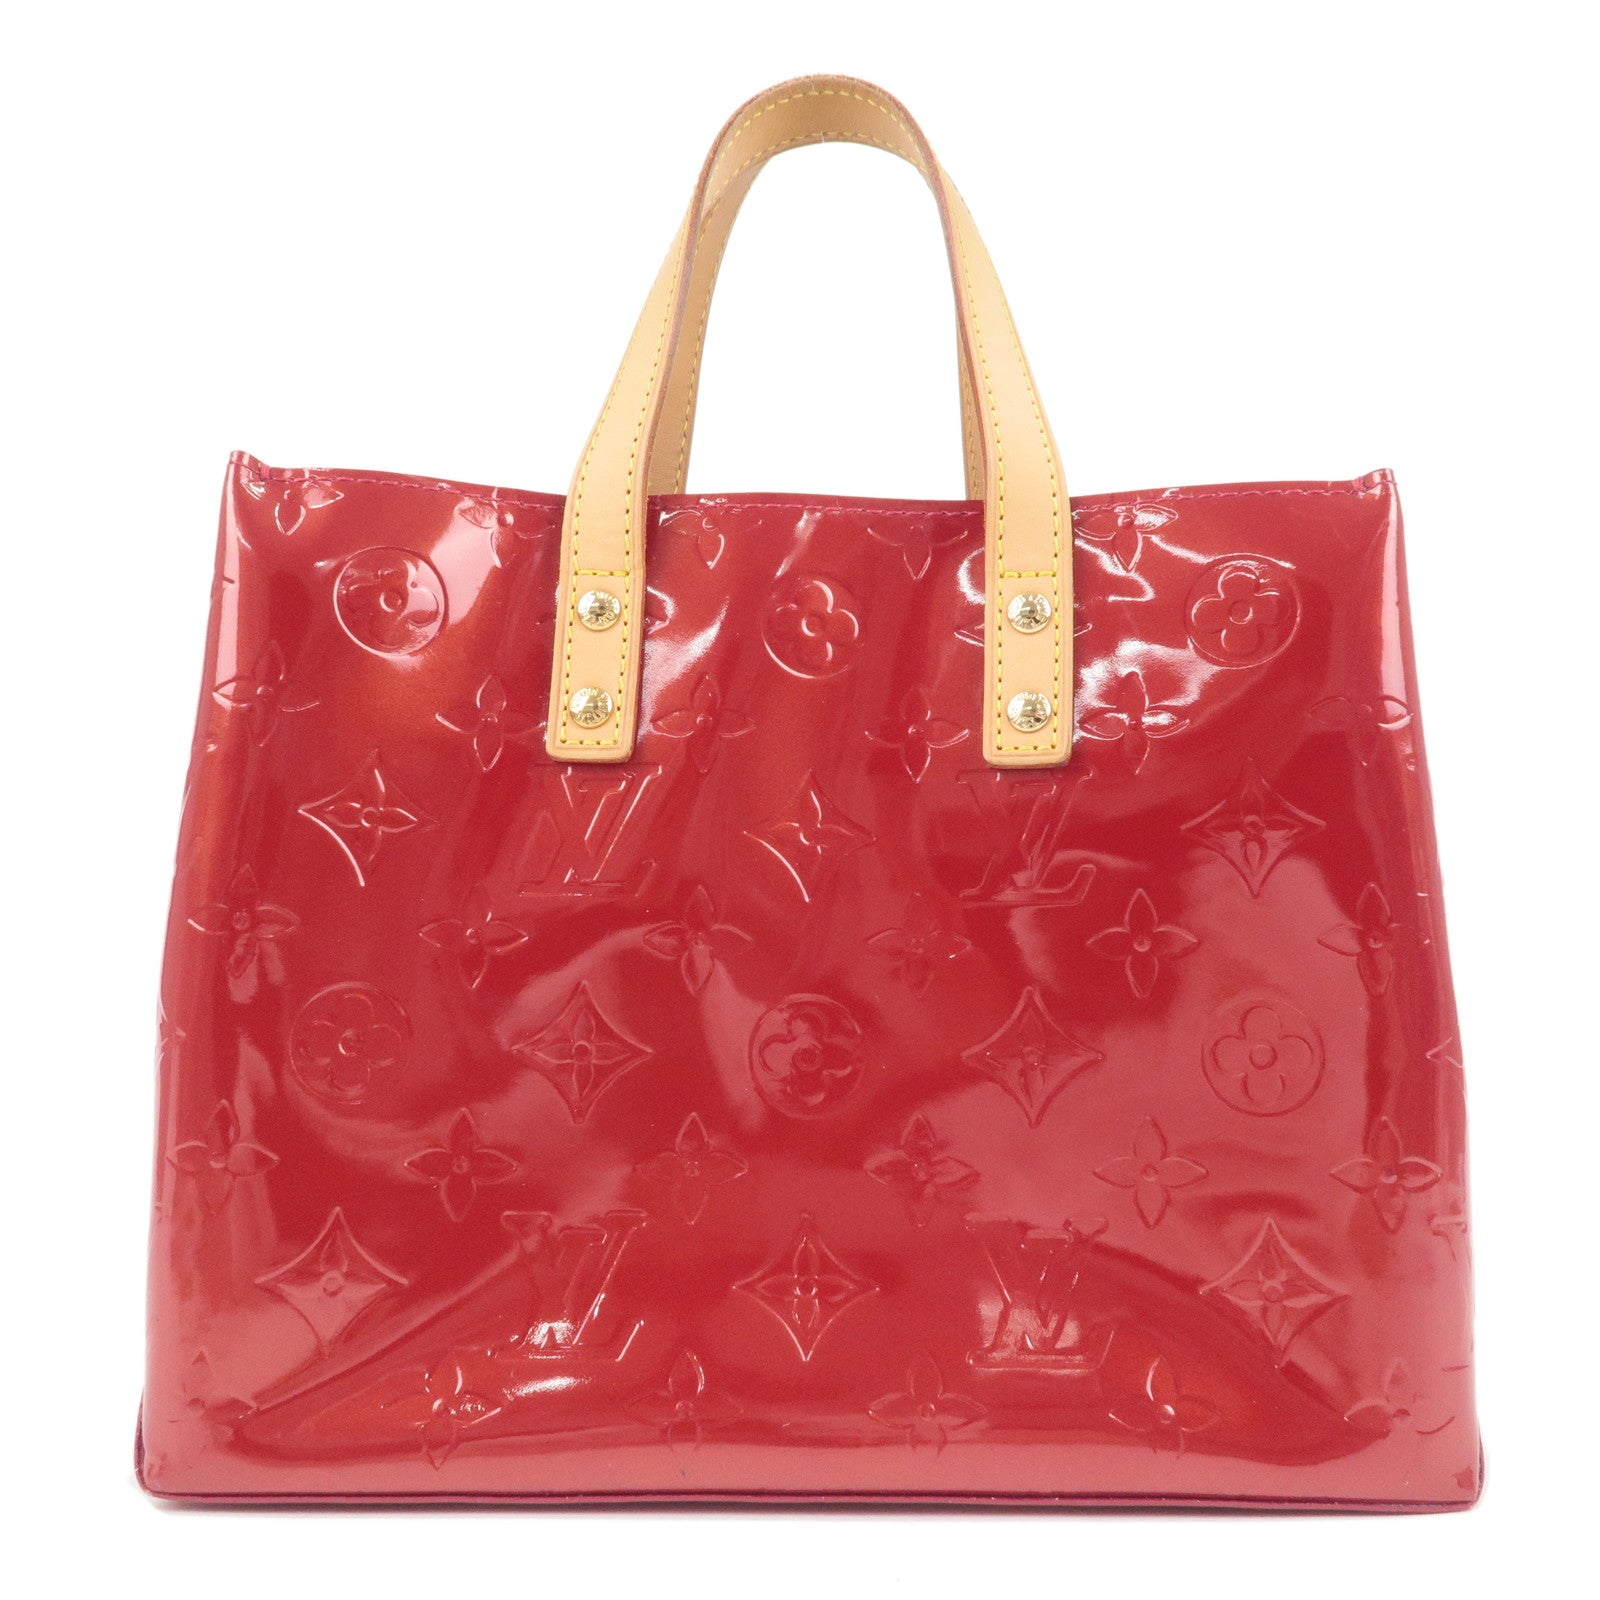 Louis Vuitton Vernis Patent Leather two-way bag